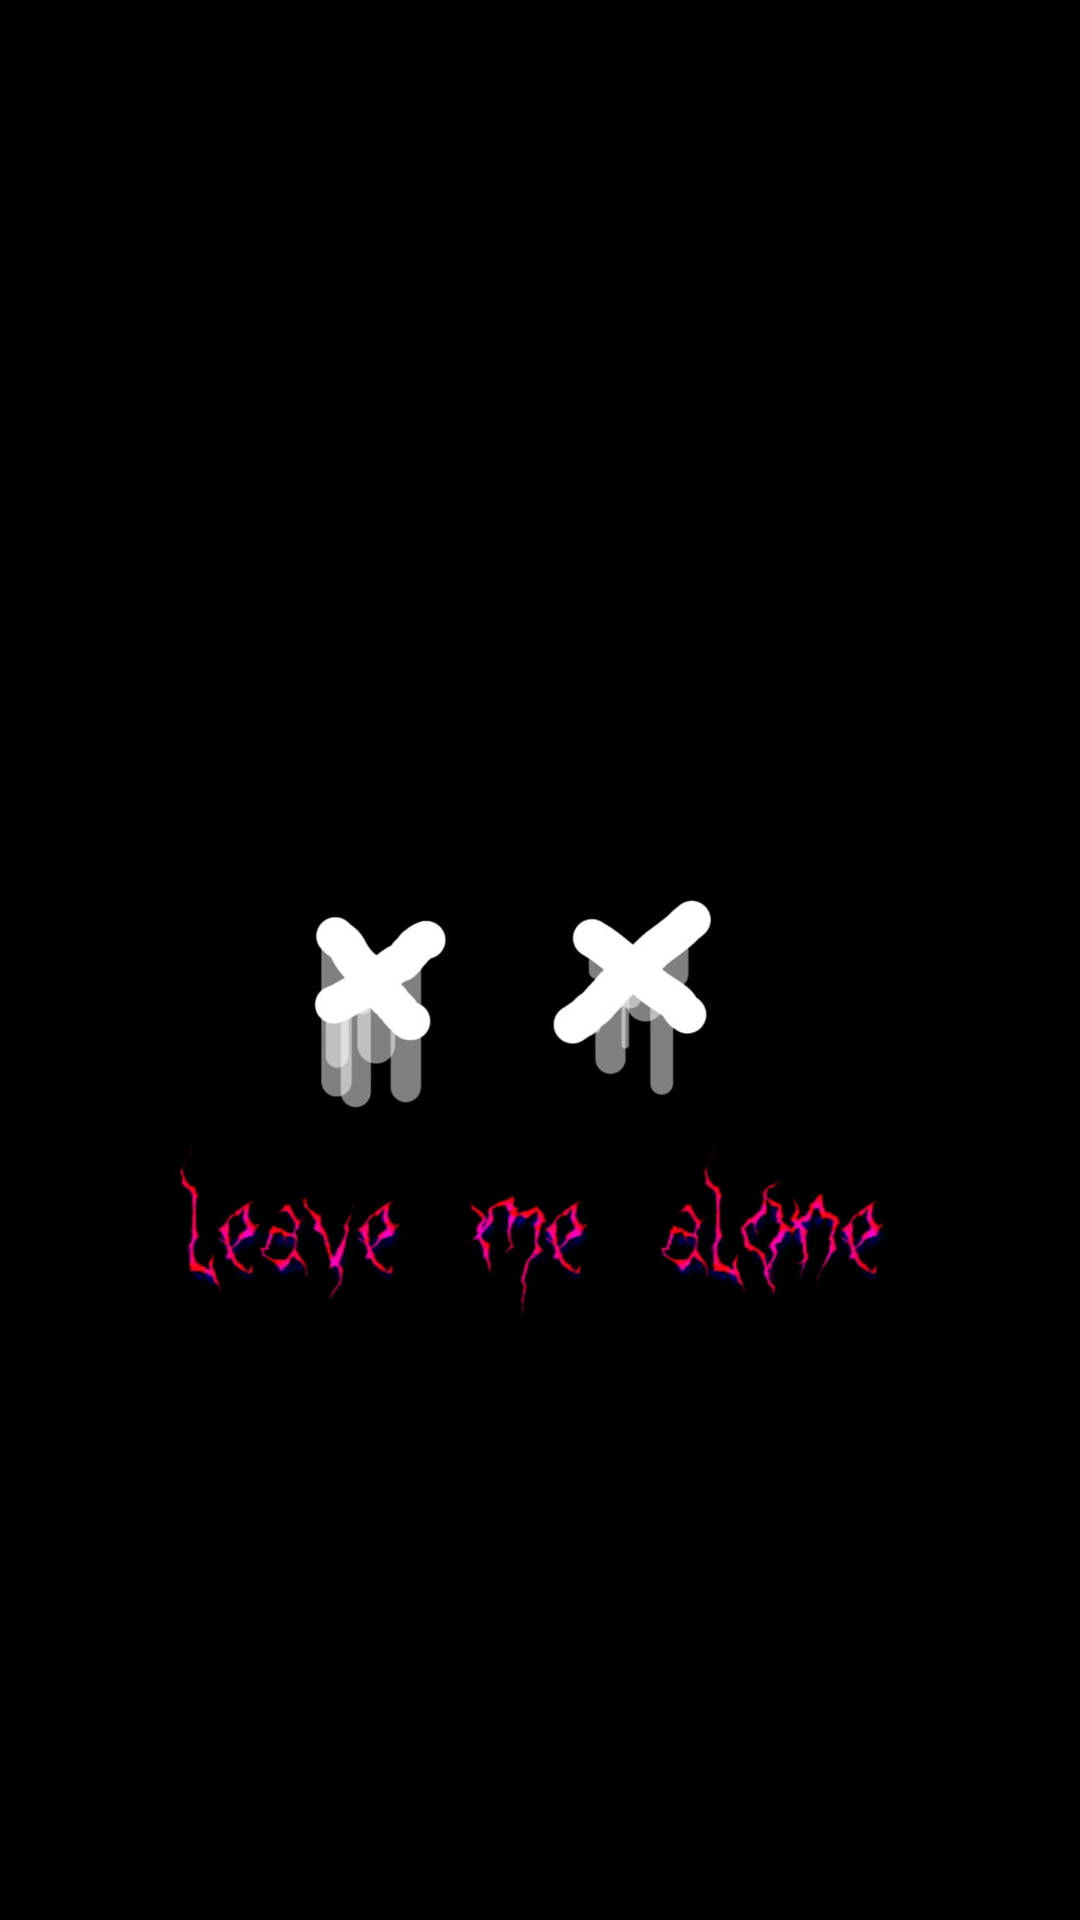 Expressive Illustration With 'x' Eyes Saying Leave Me Alone Background